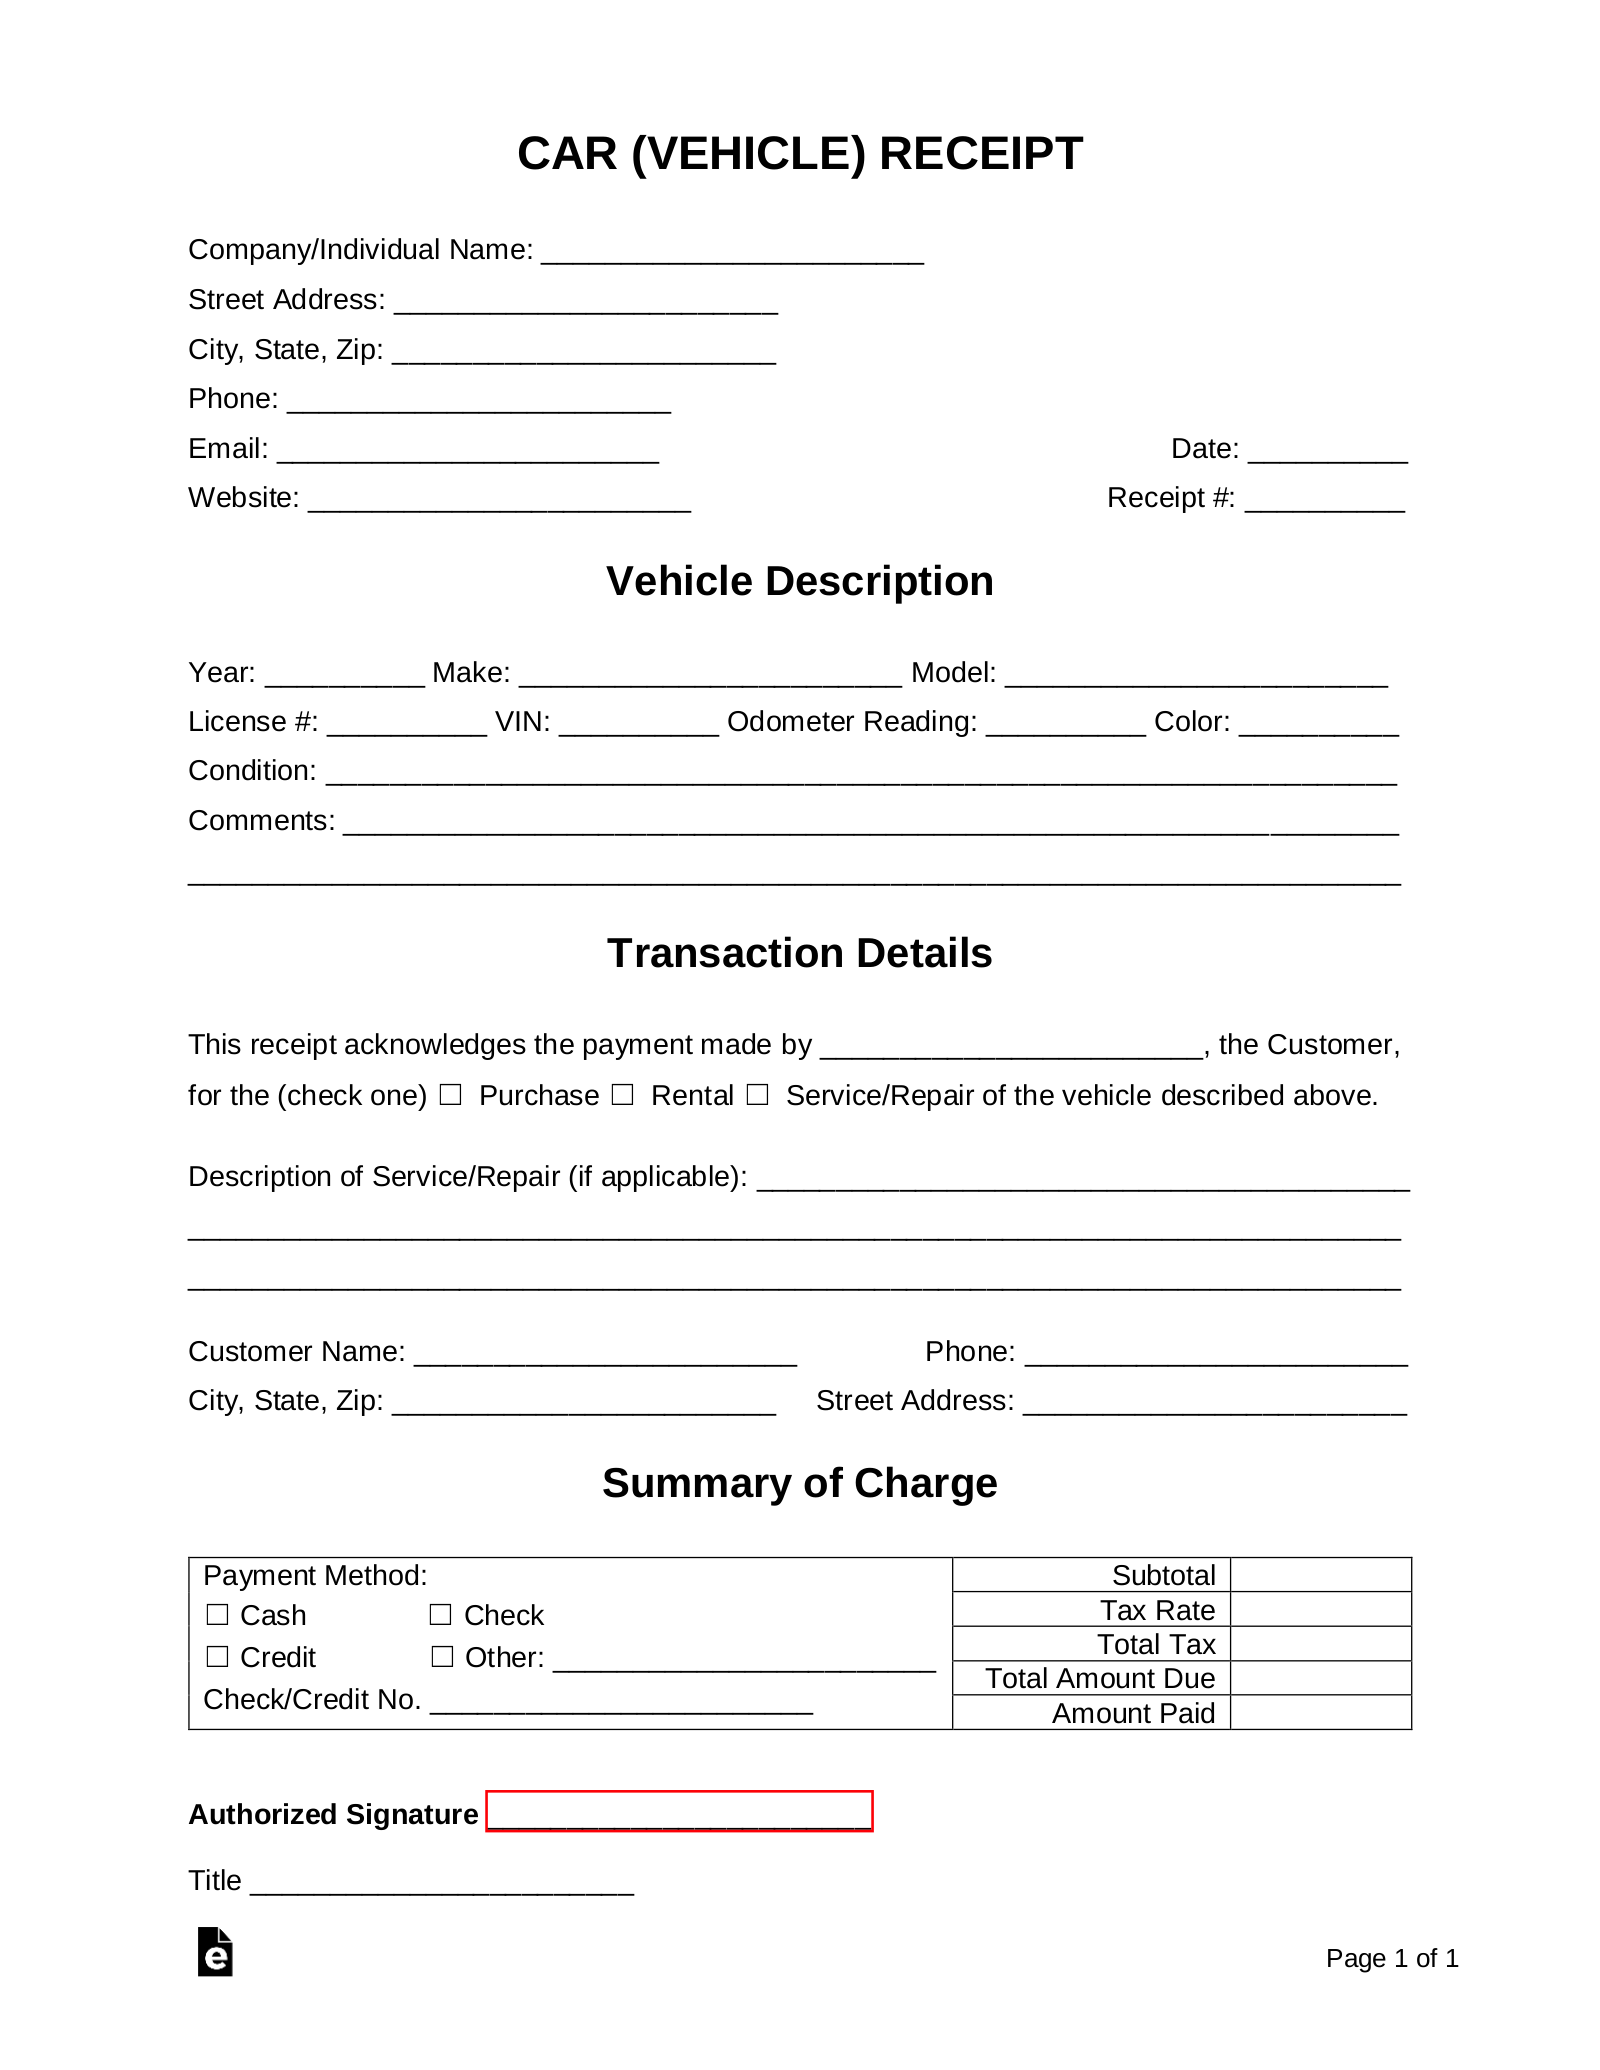 Free Car Vehicle Receipt Template PDF Word EForms